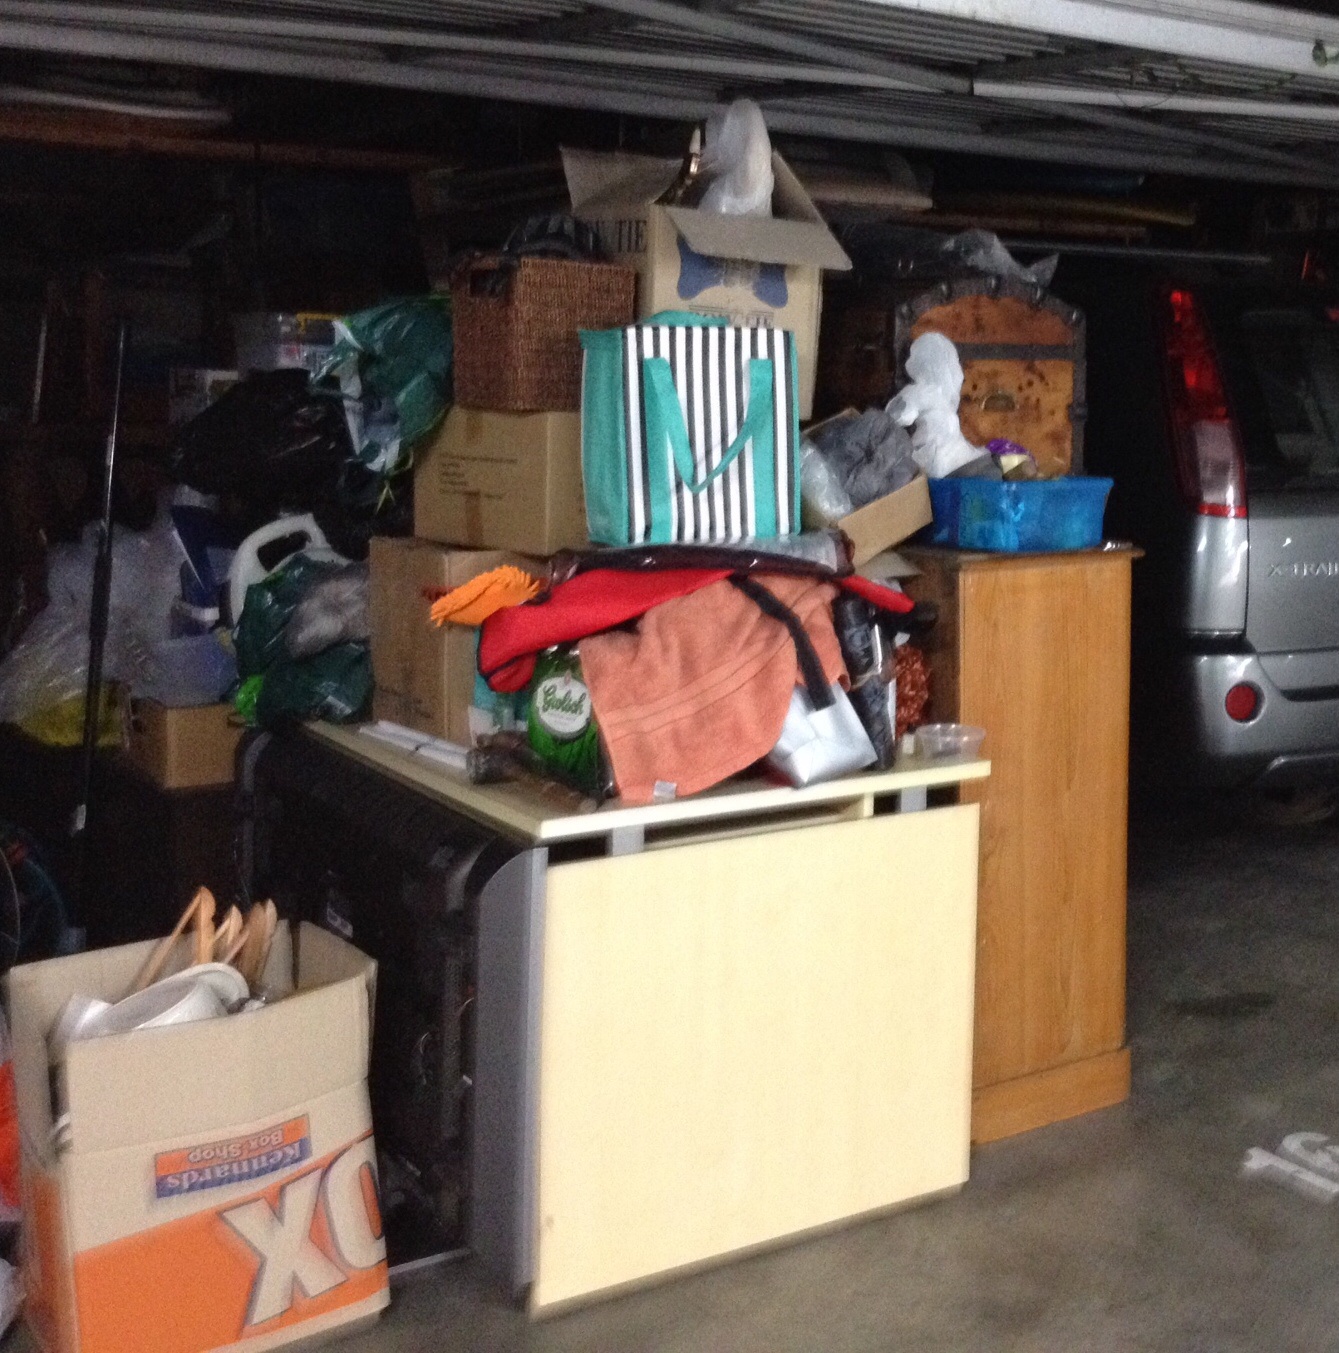 When everything but the car is parked in your garage, a crash reorganization is in order.